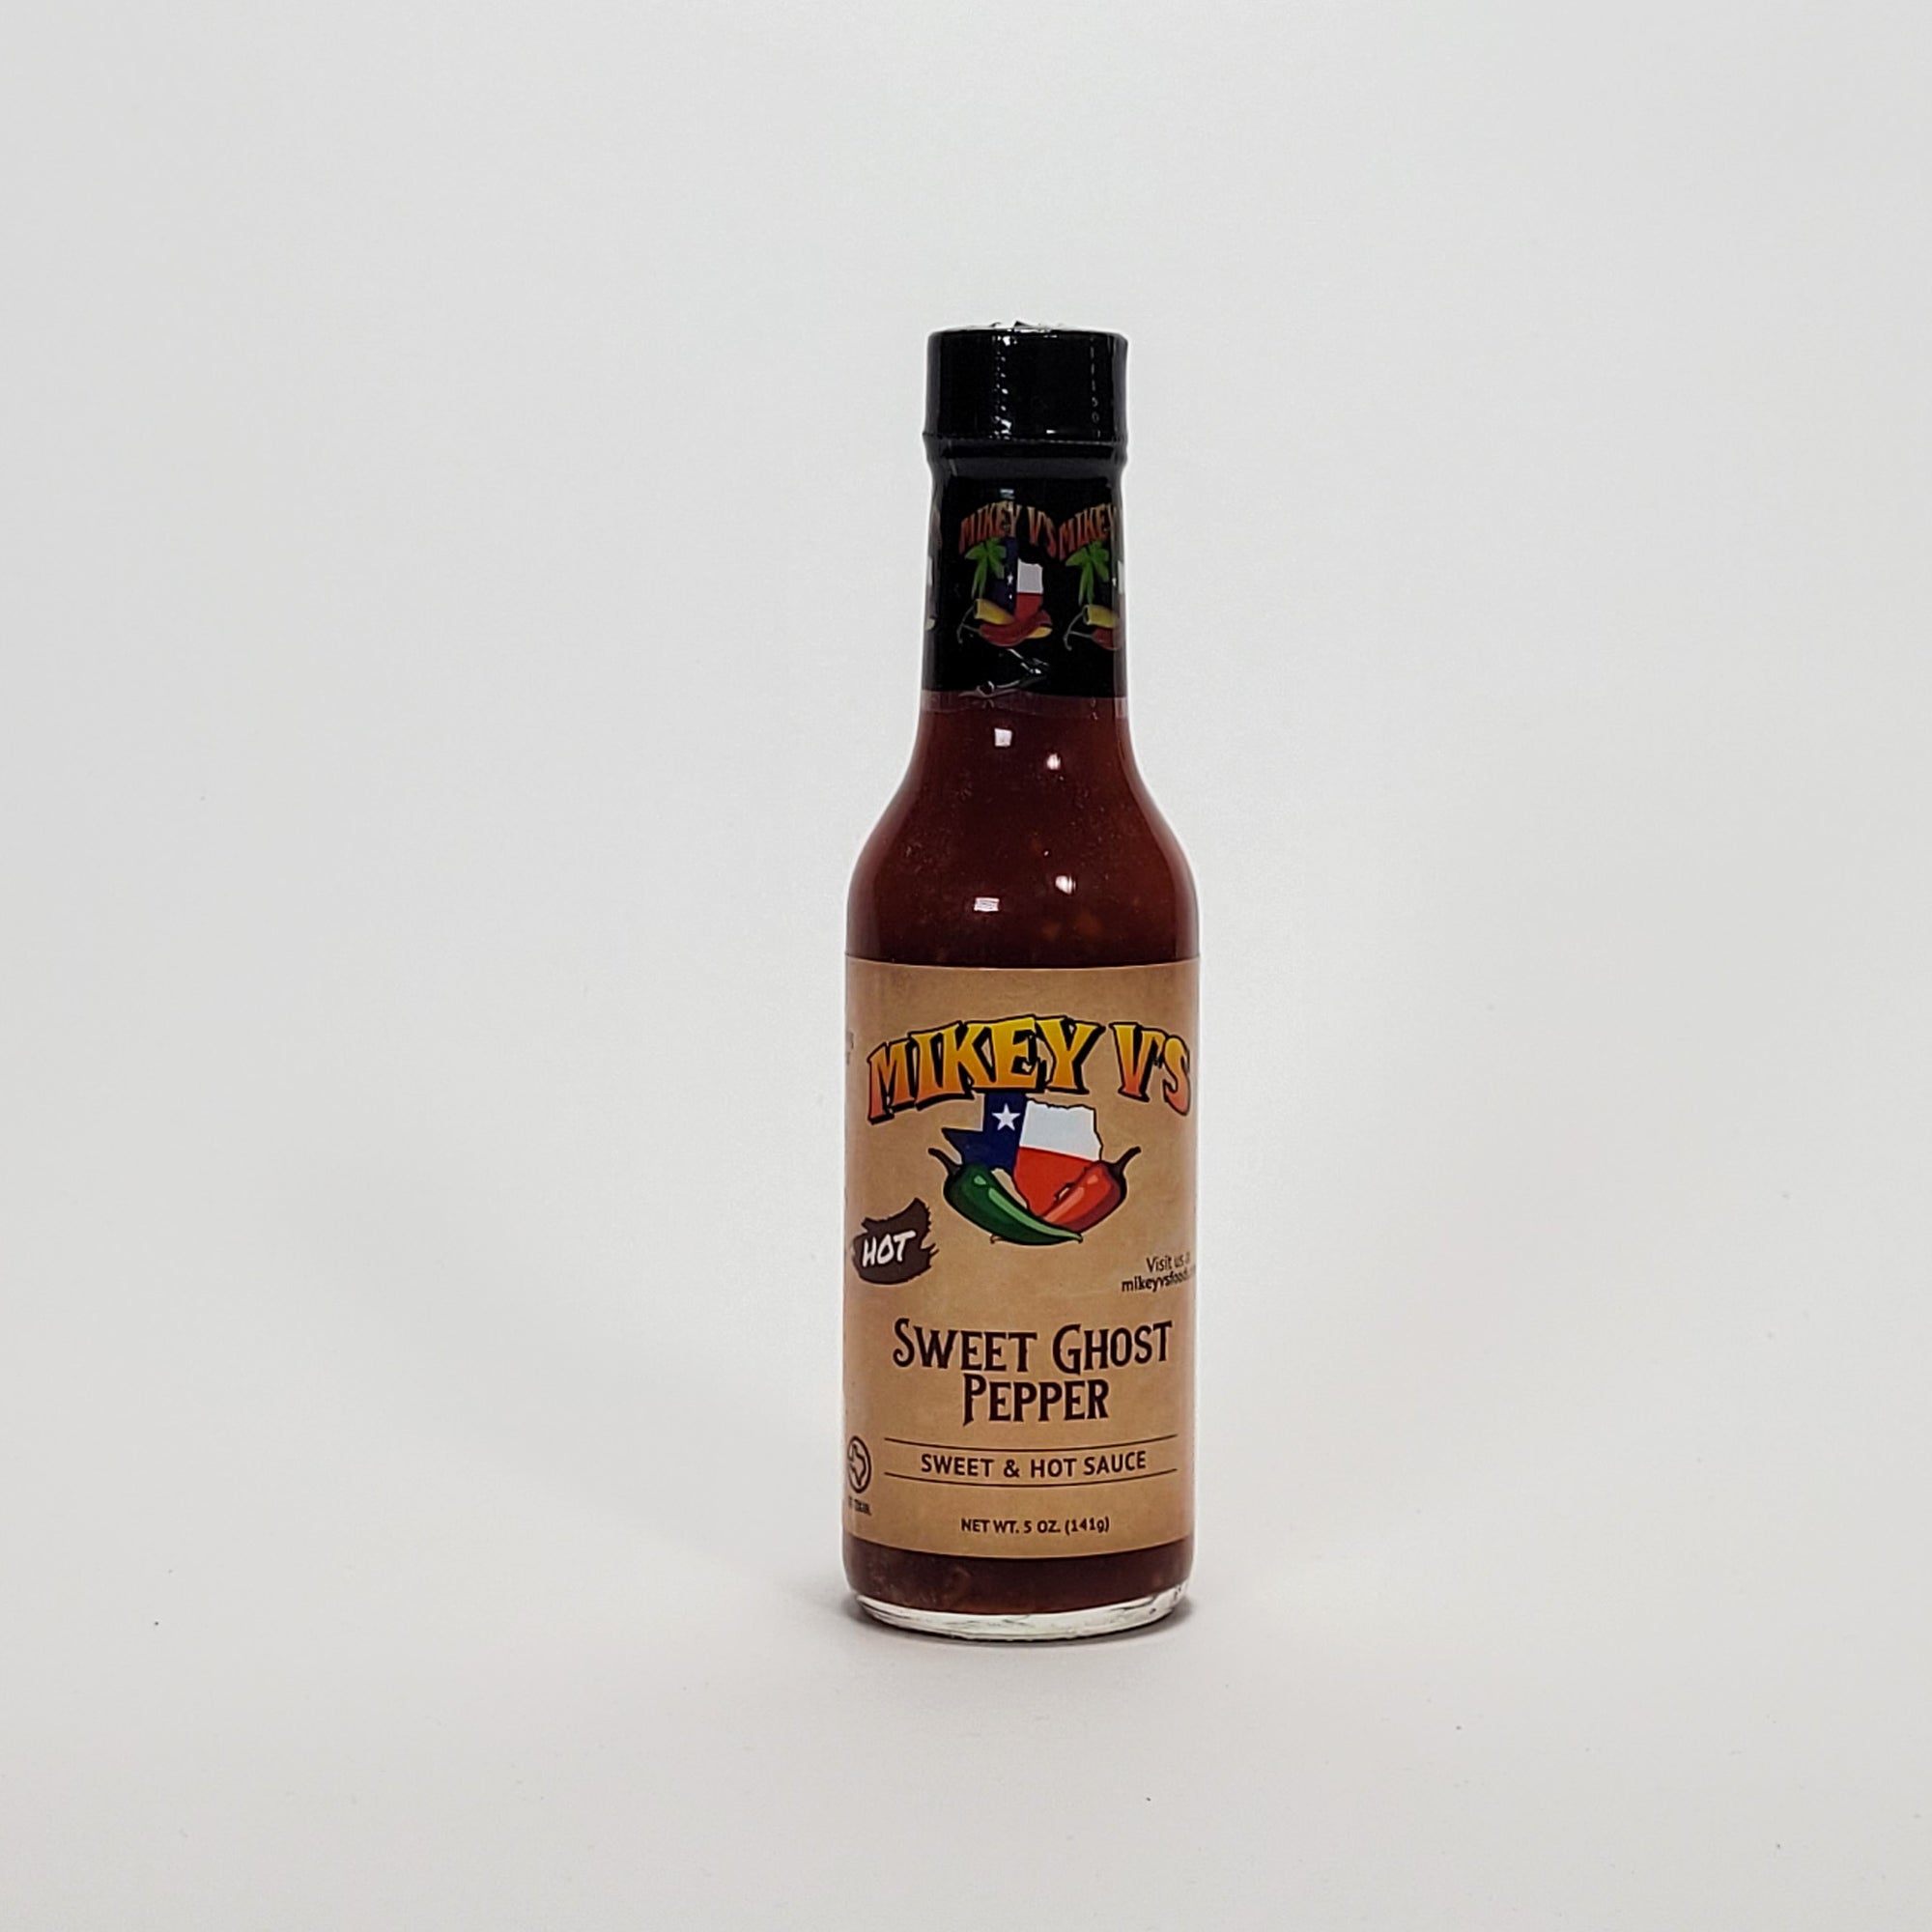 Mikey V's Sweet Ghost Pepper hot sauce